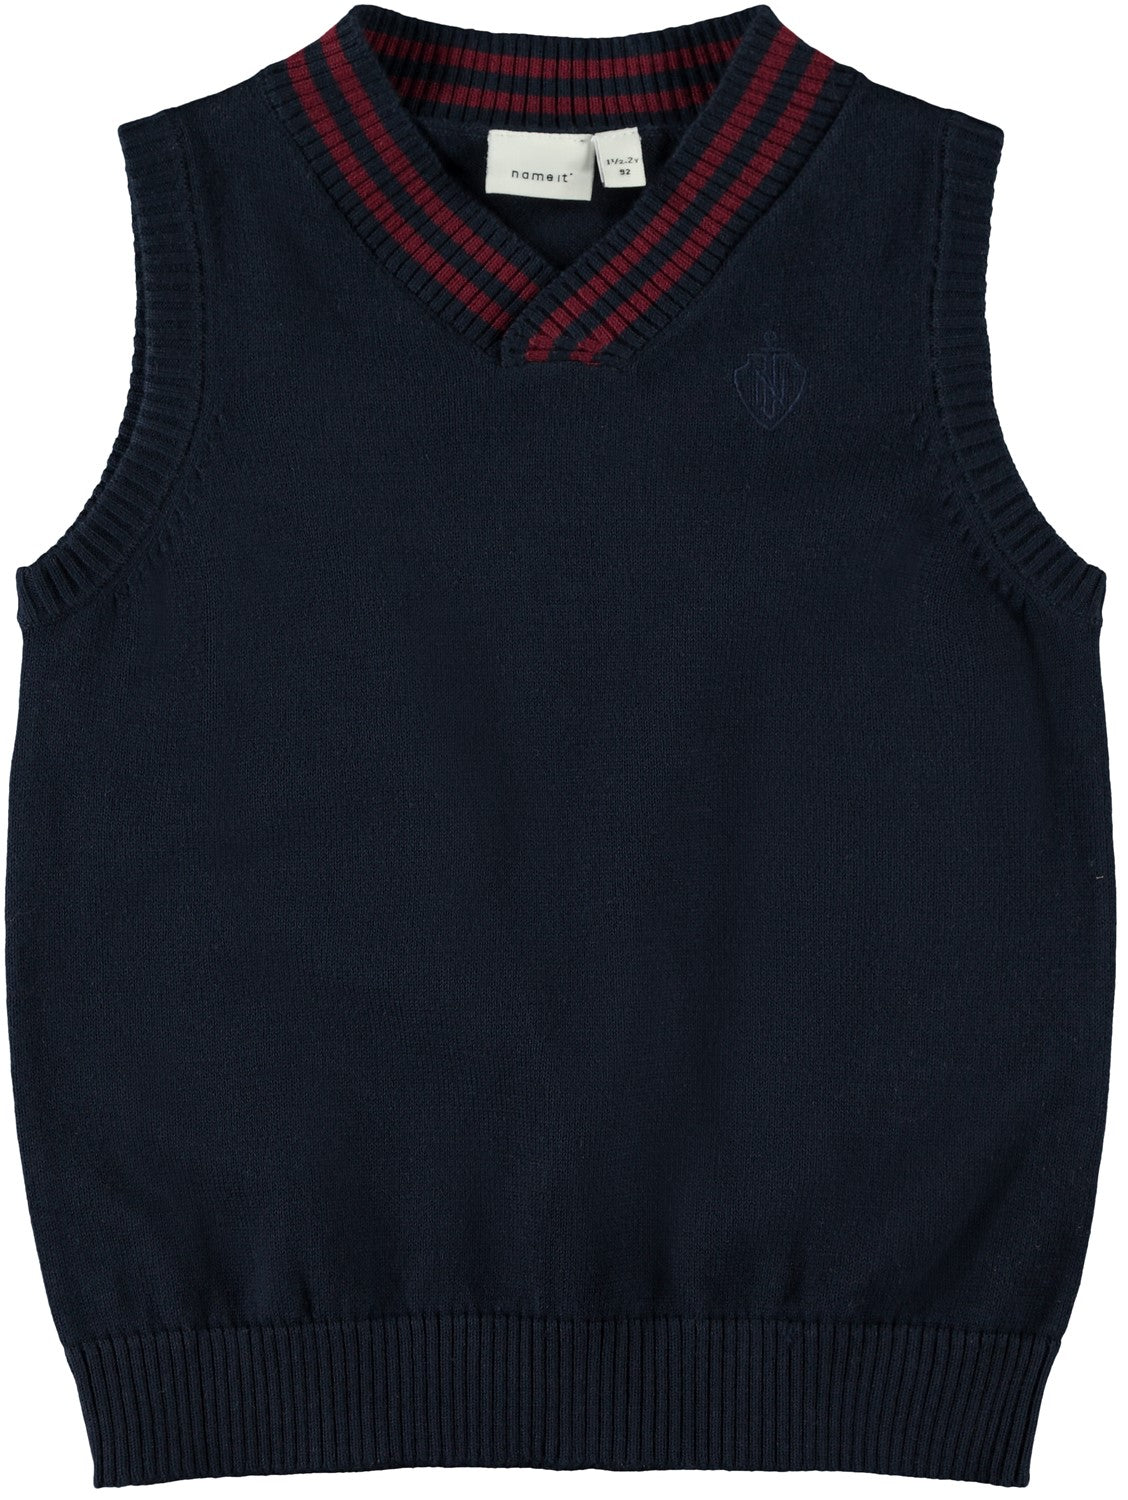 name it mini boy navy sleeveless pullover with red collar detail